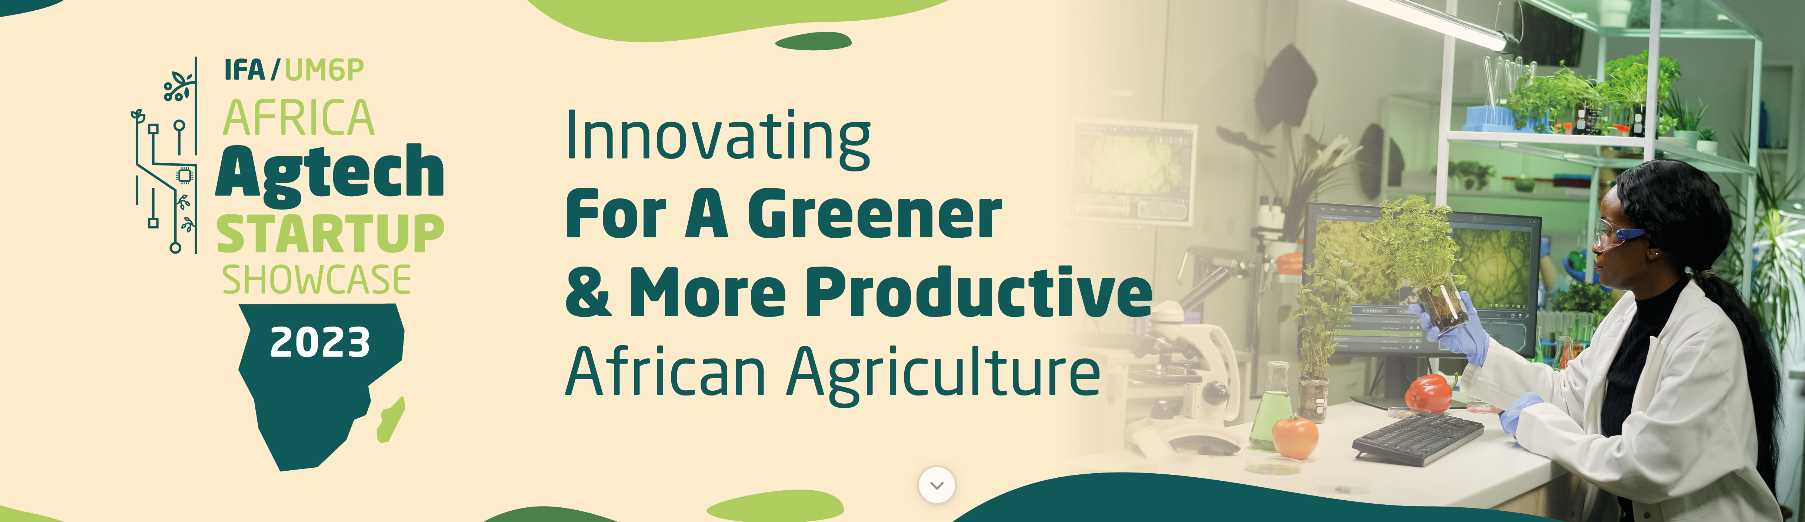 Africa AgTech Startup Showcase 2023 for Agriculture Innovation